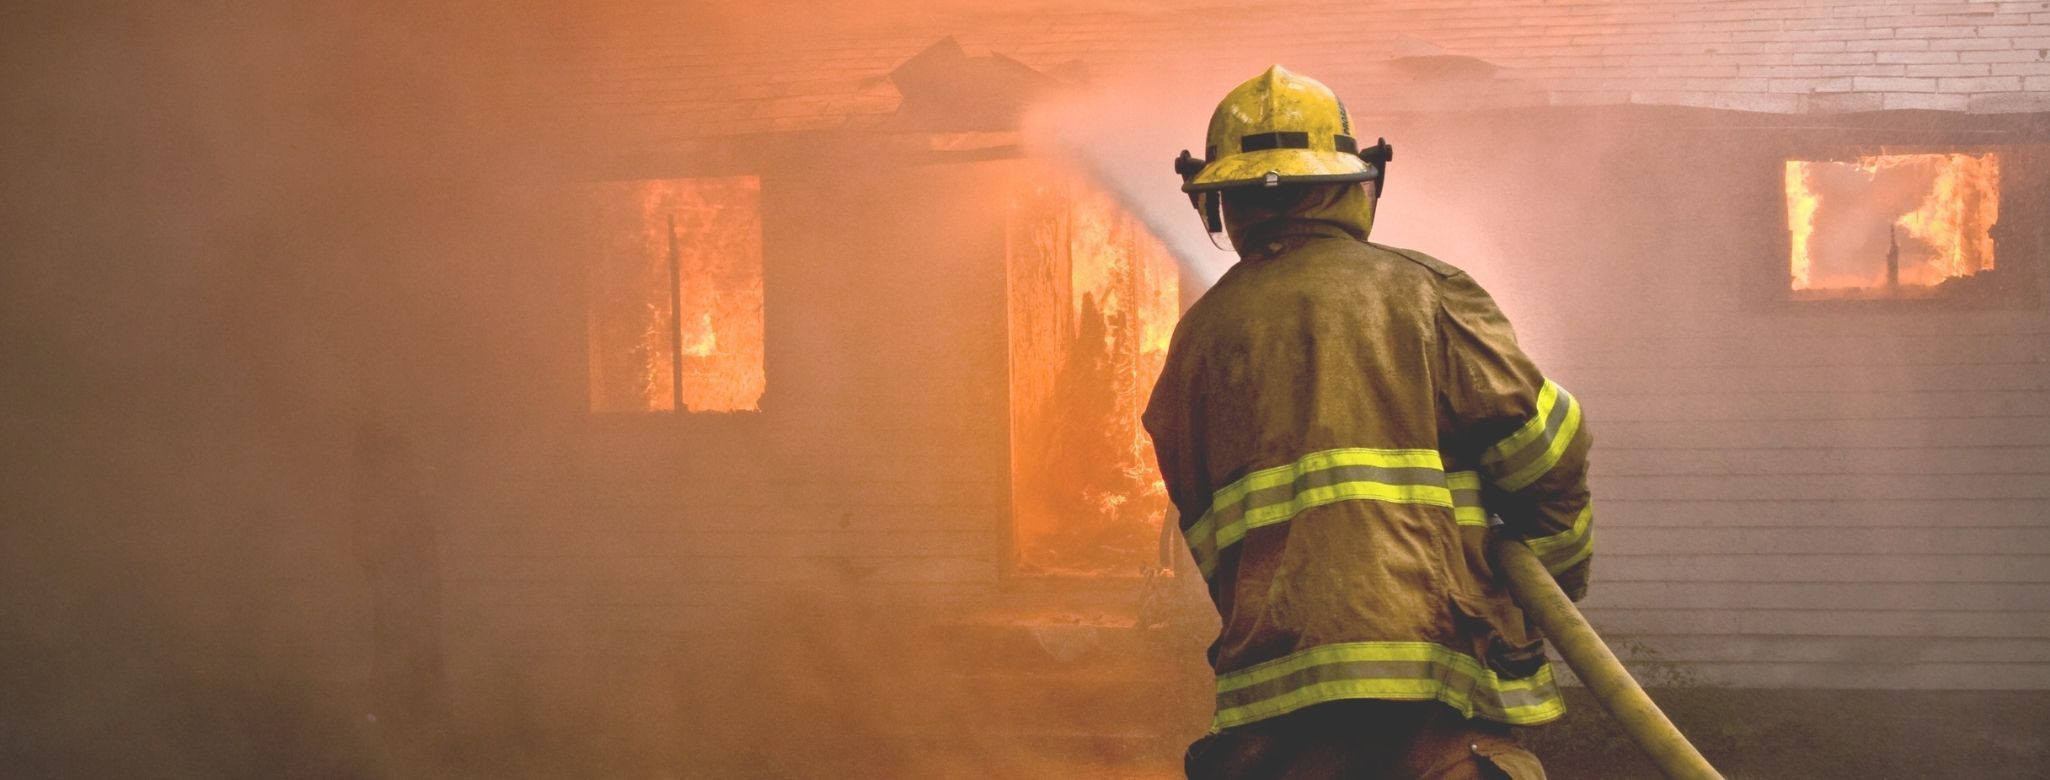 four simple tips to avoid house fires